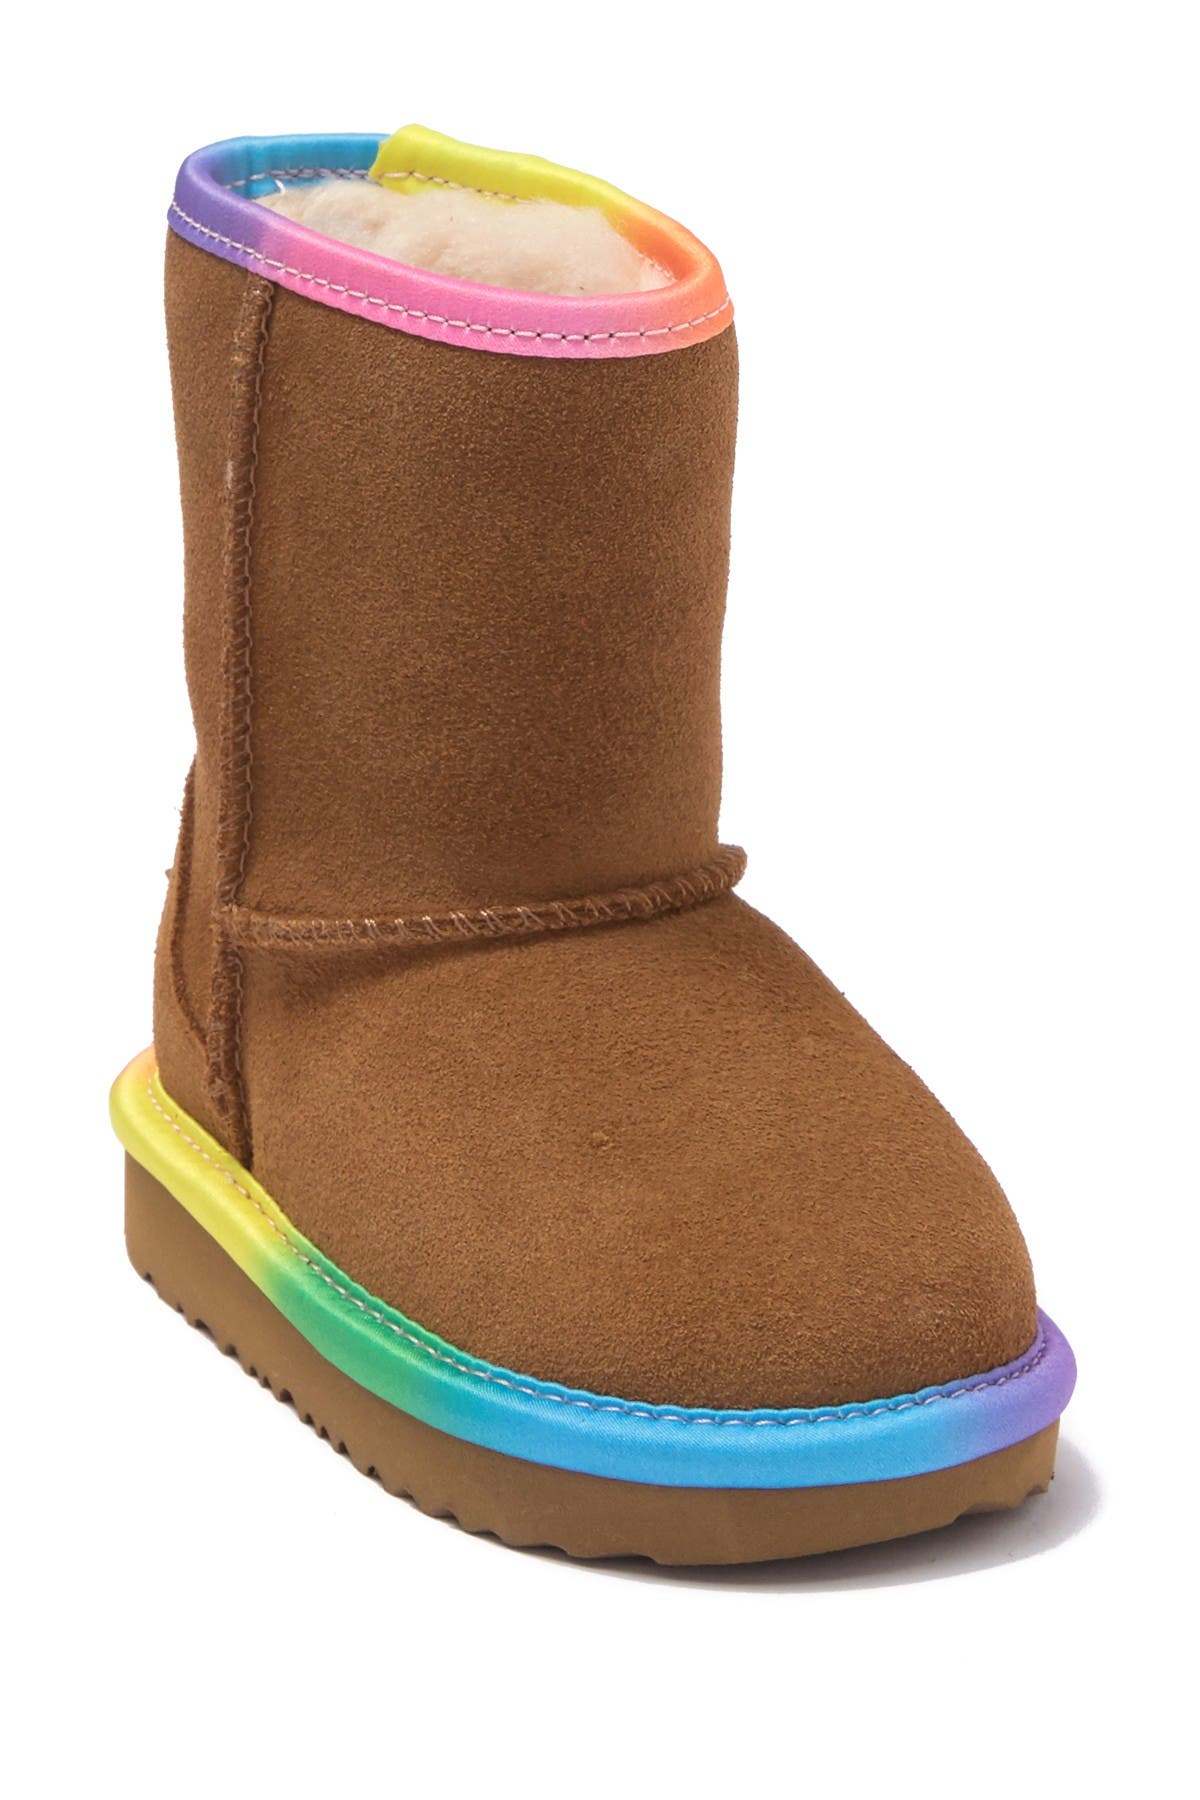 official ugg boots site